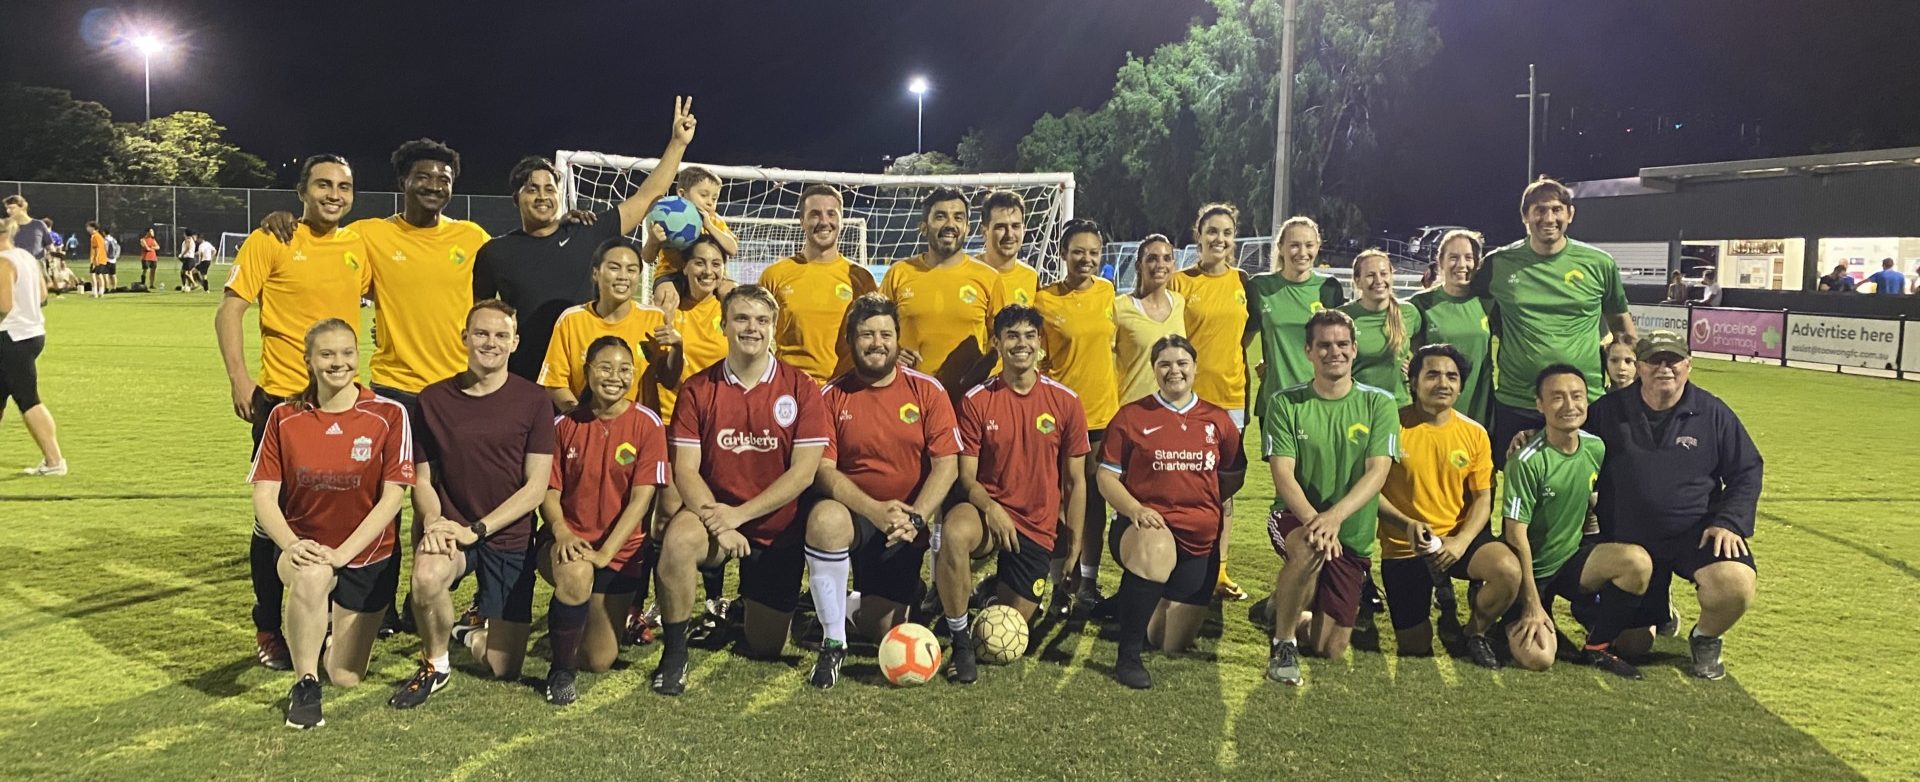 Bayside FC over 35s